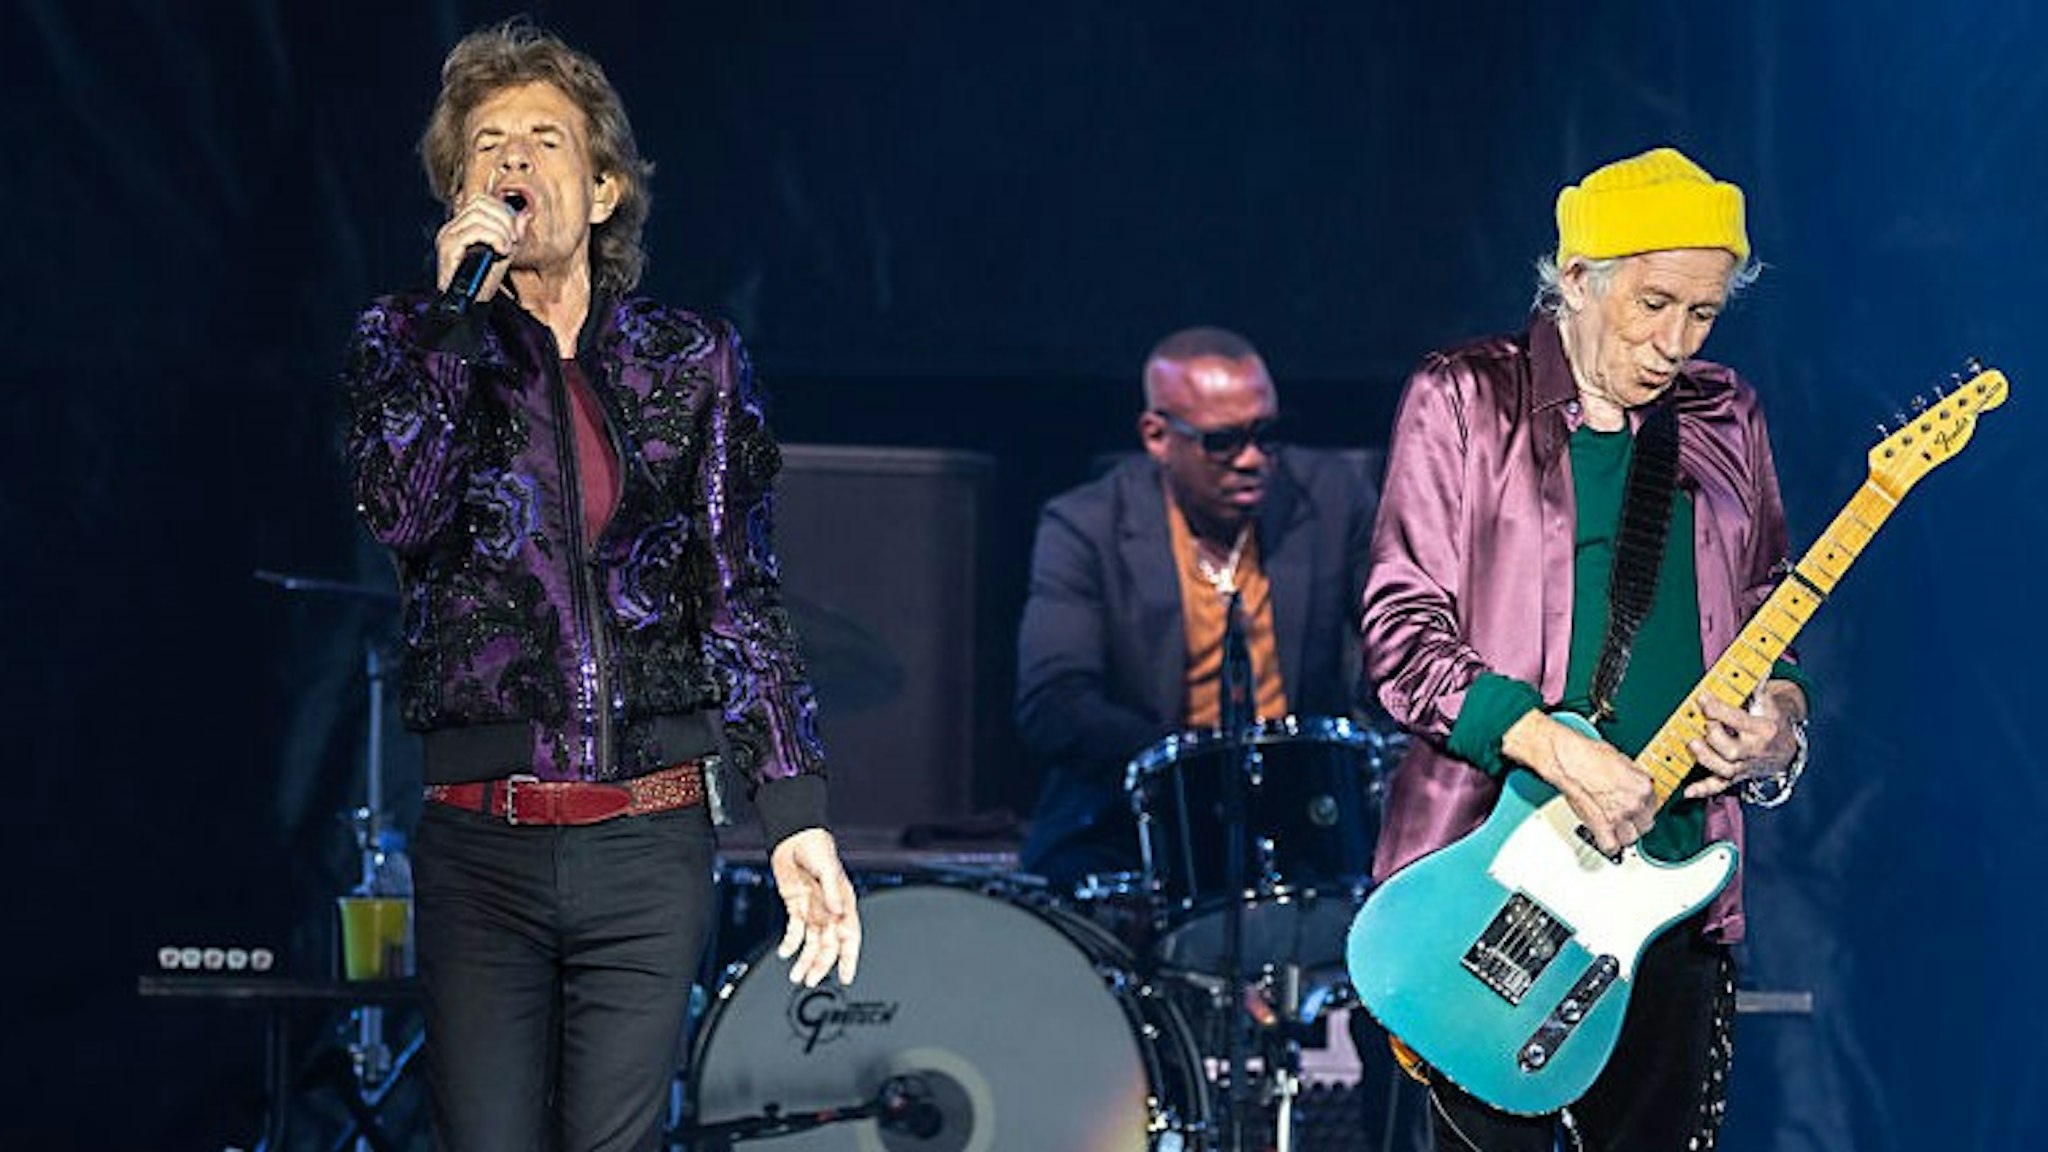 CHARLOTTE, NORTH CAROLINA - SEPTEMBER 30: Singer Mick Jagger (L) and guitarist Keith Richards of The Rolling Stones perform at Bank of America Stadium on September 30, 2021 in Charlotte, North Carolina. (Photo by